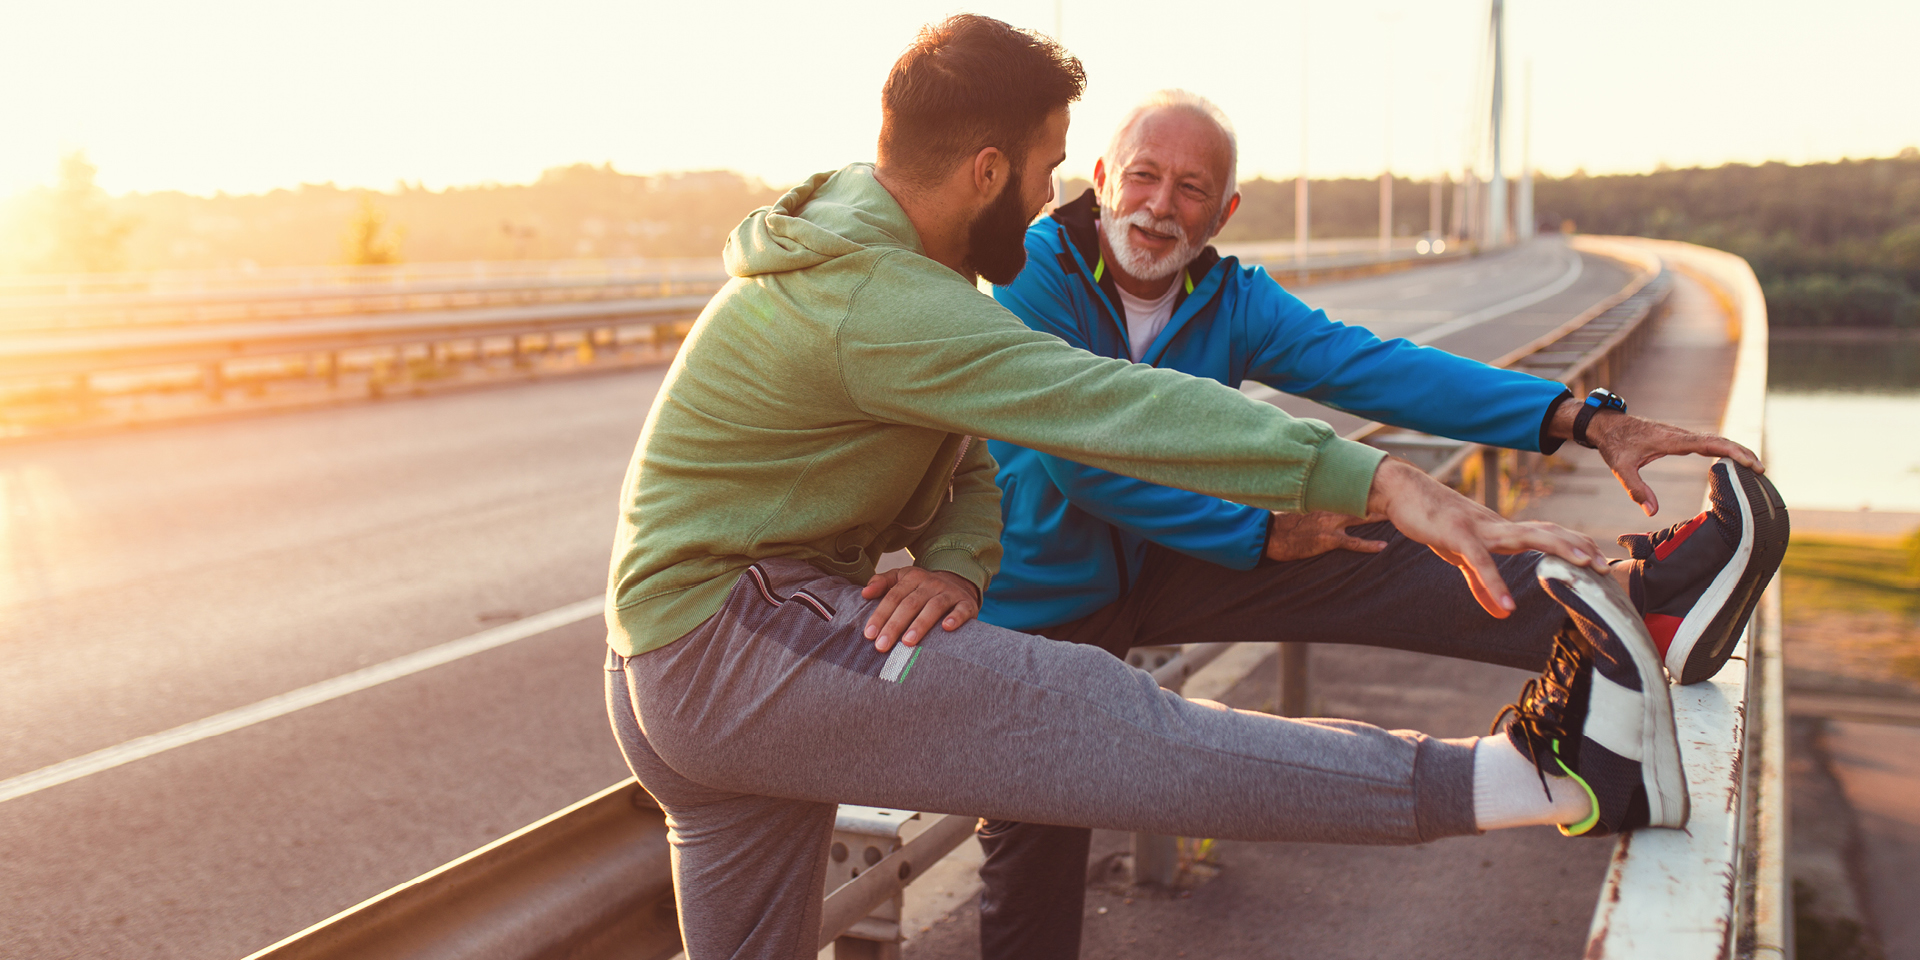 younger man and older man in sweats prop their legs on a wall to stretch